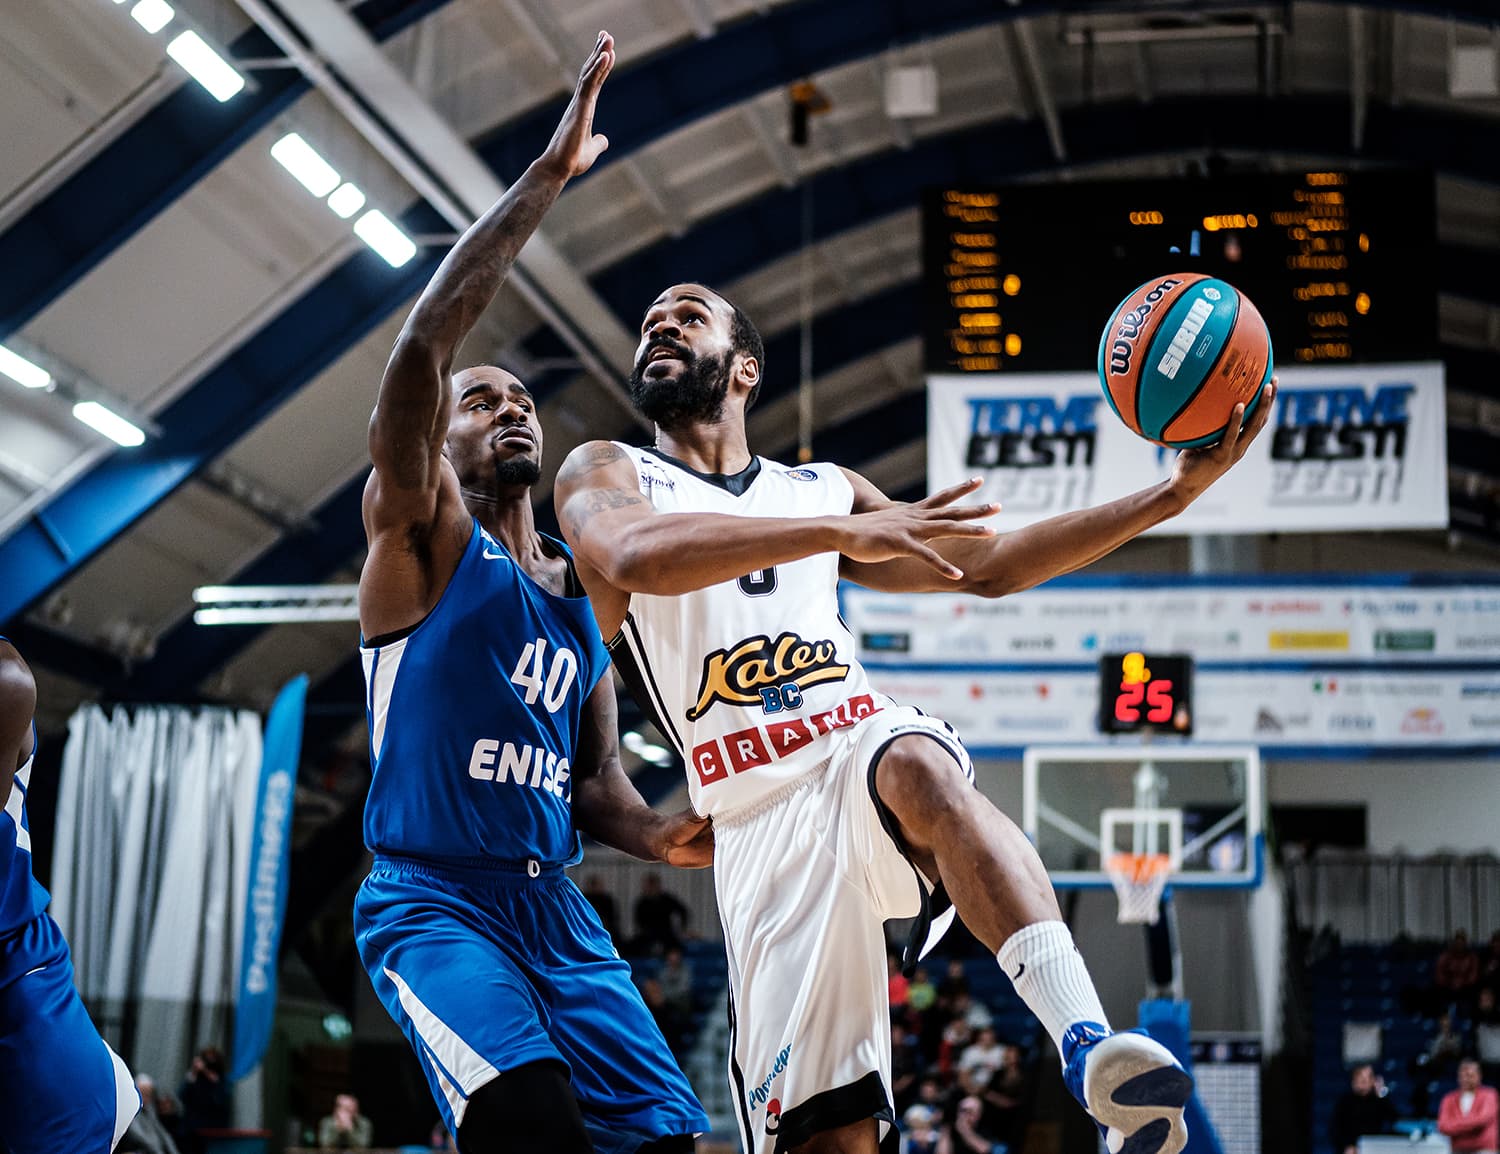 Tradition is kept. Kalev beat Enisey fifth time in row